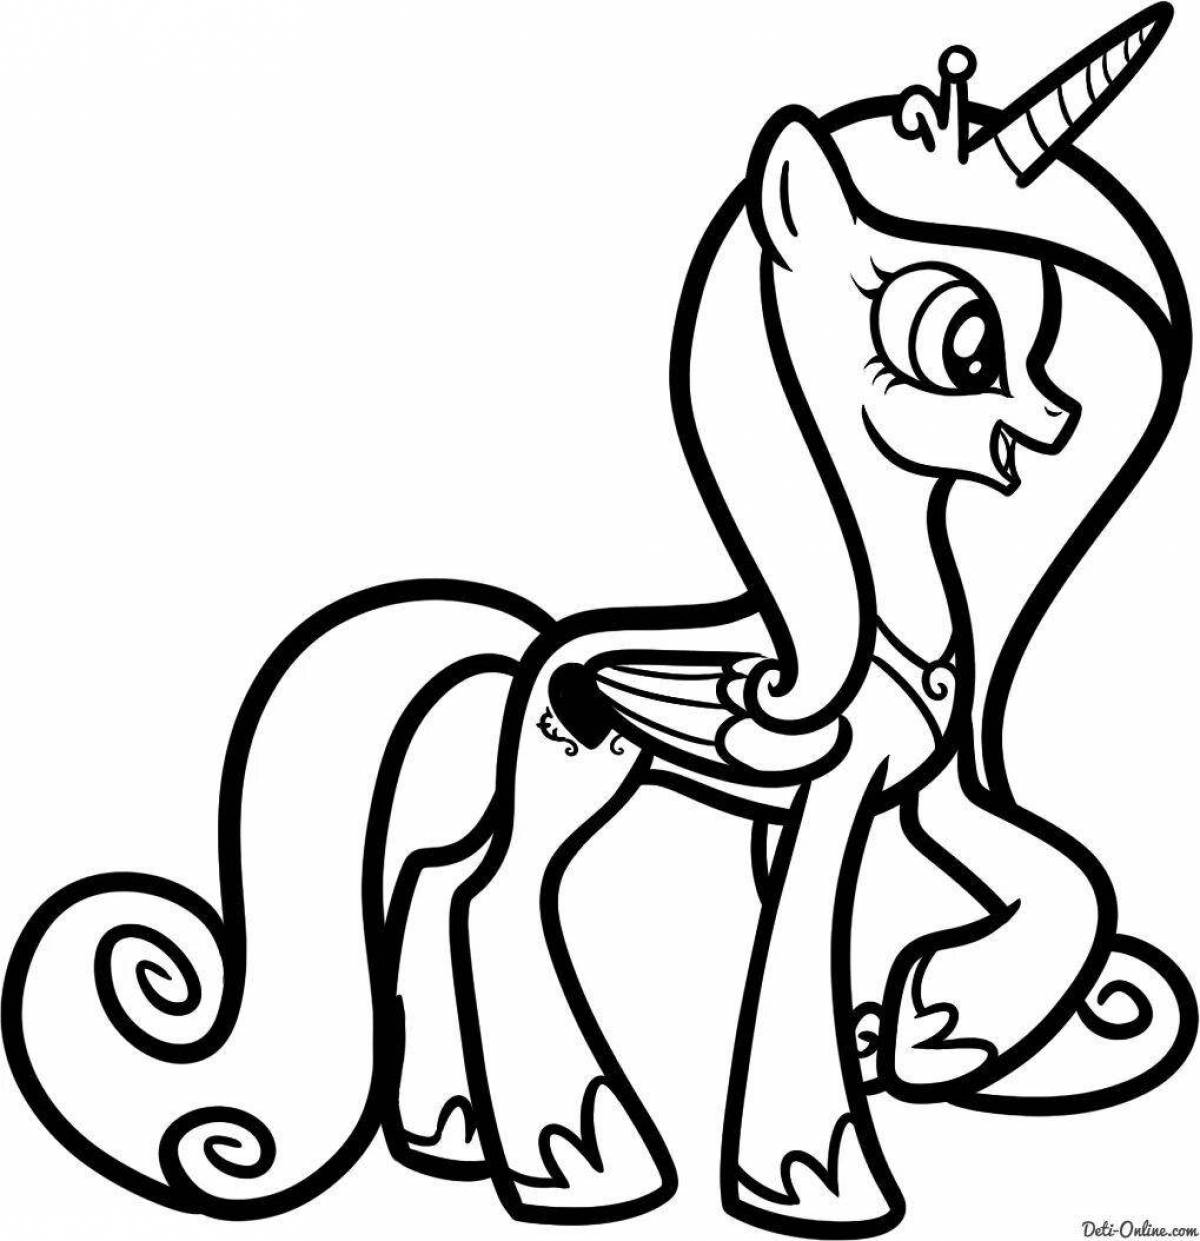 Outstanding cadence pony coloring page